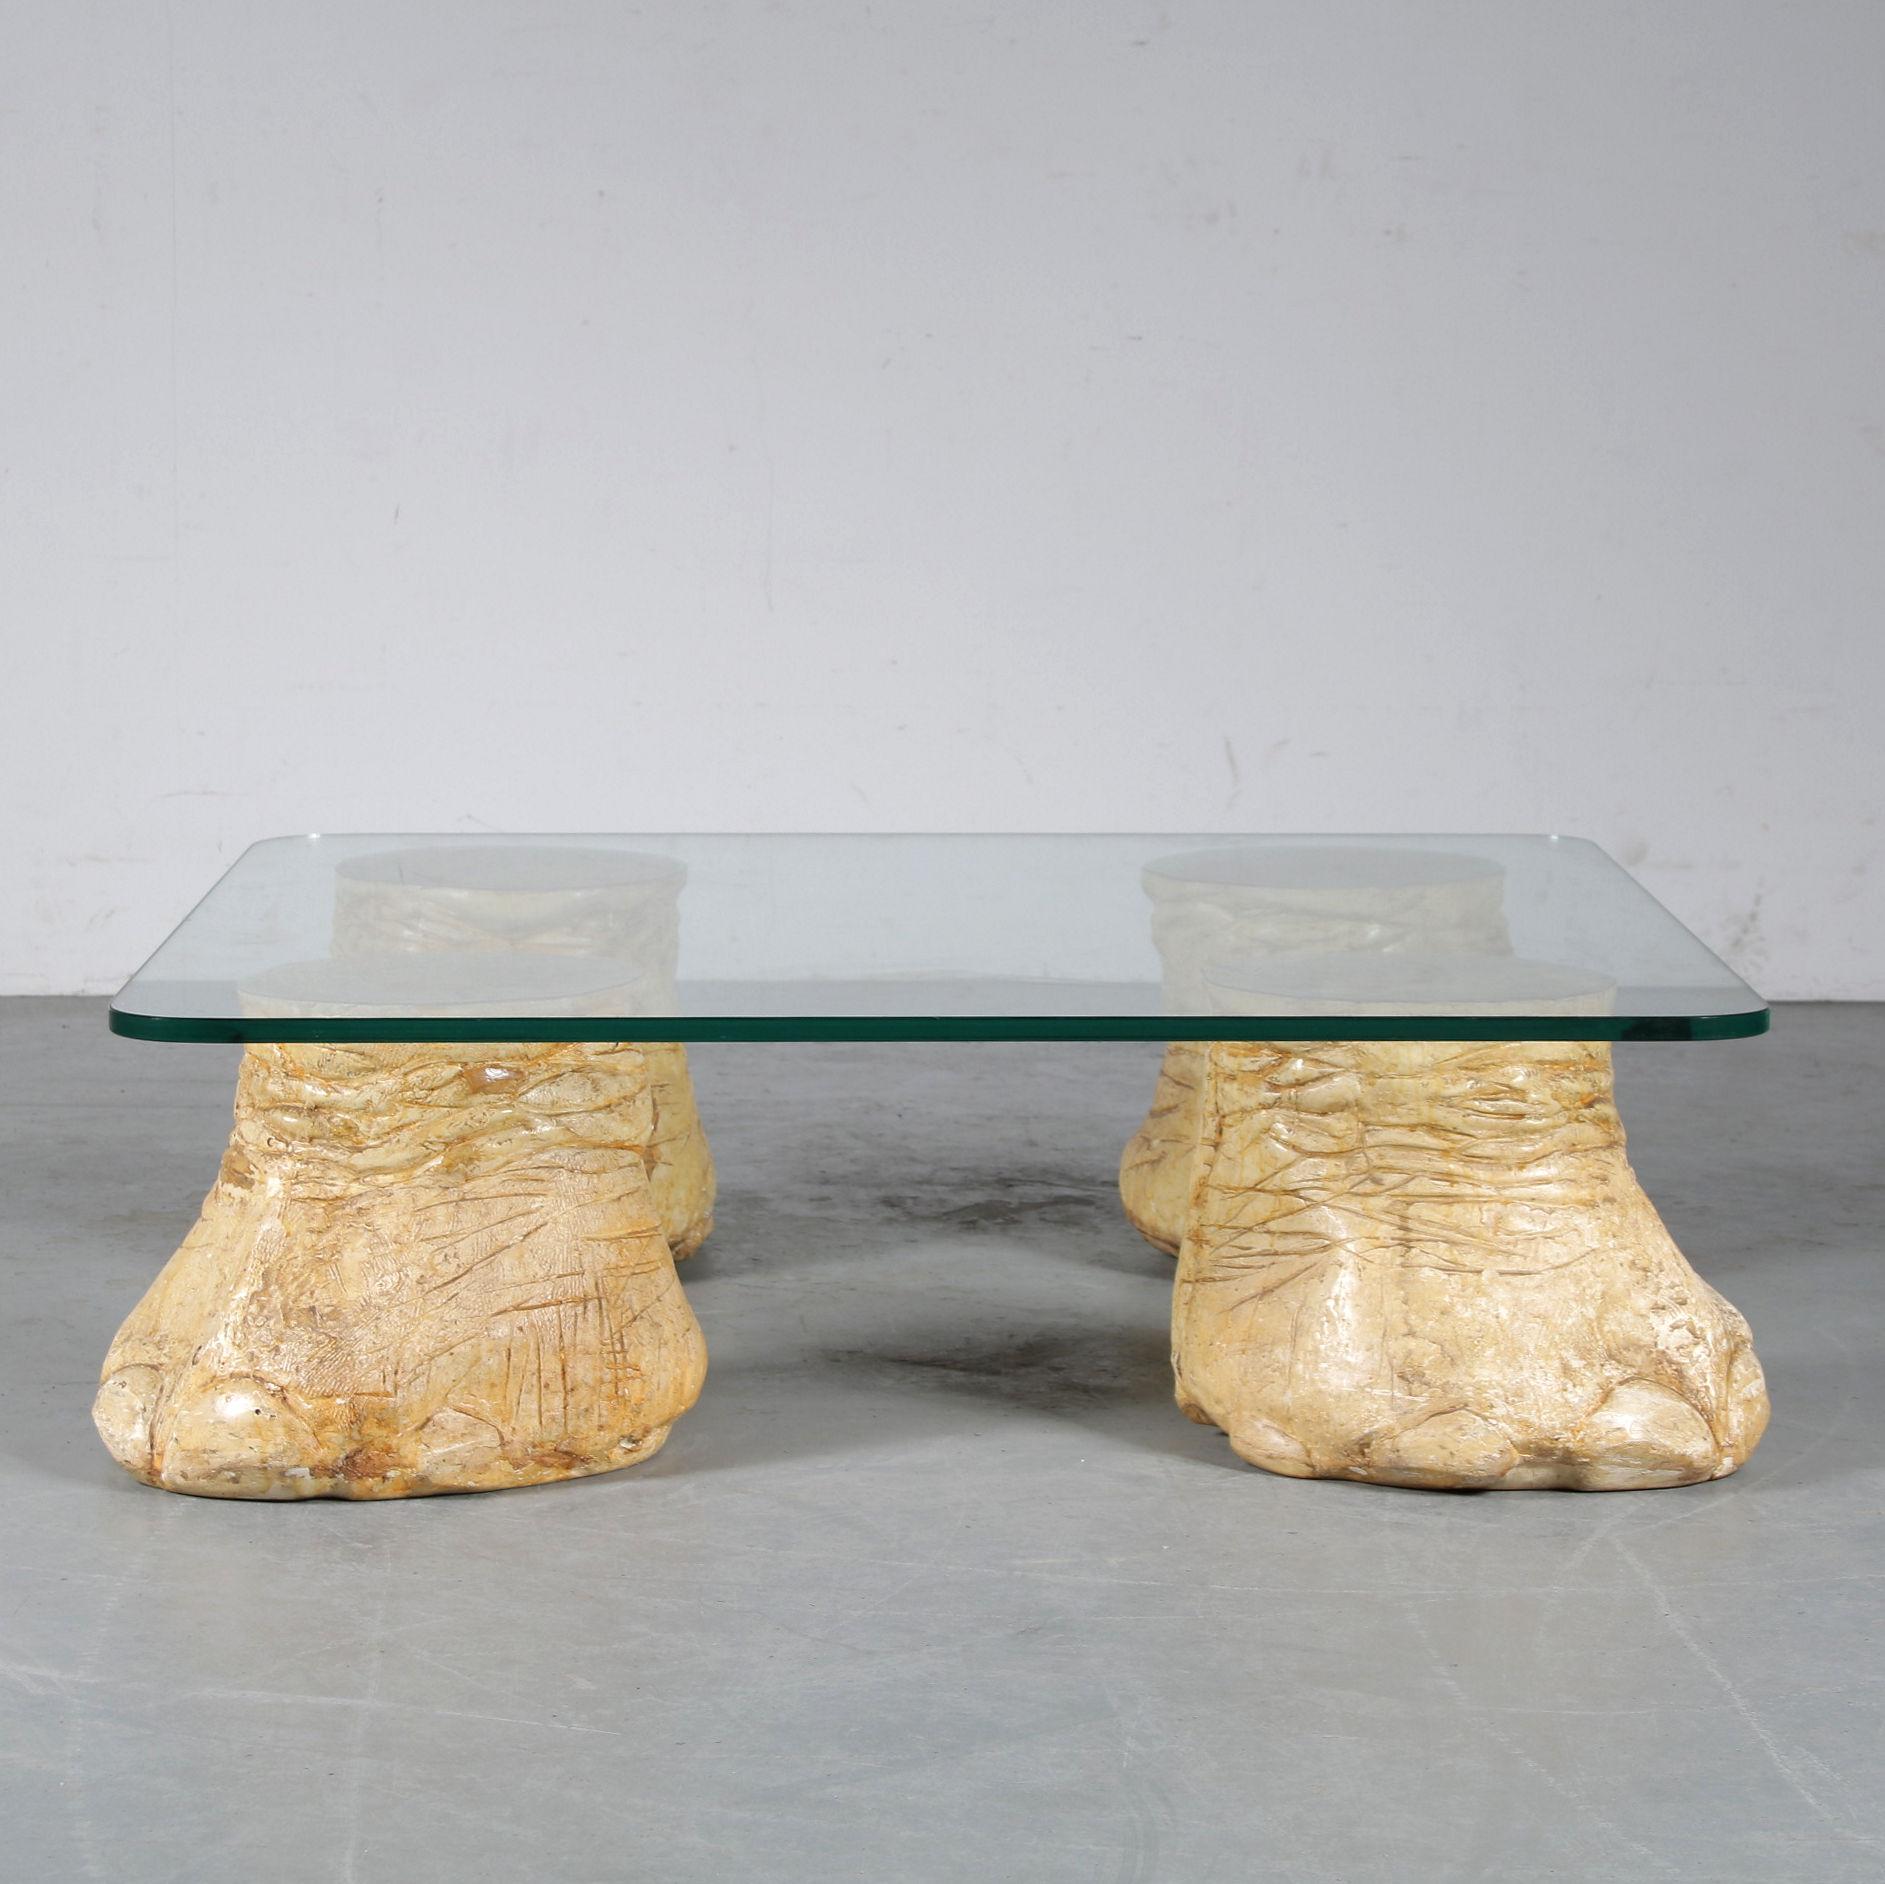 A beautiful coffee table in eye-catching design from the 1960s! The base is made of four seperate faux elephant legs, shaped with an impressive eye for detail that remarkably resembles actual elephant legs. It gives the table a unique style! The